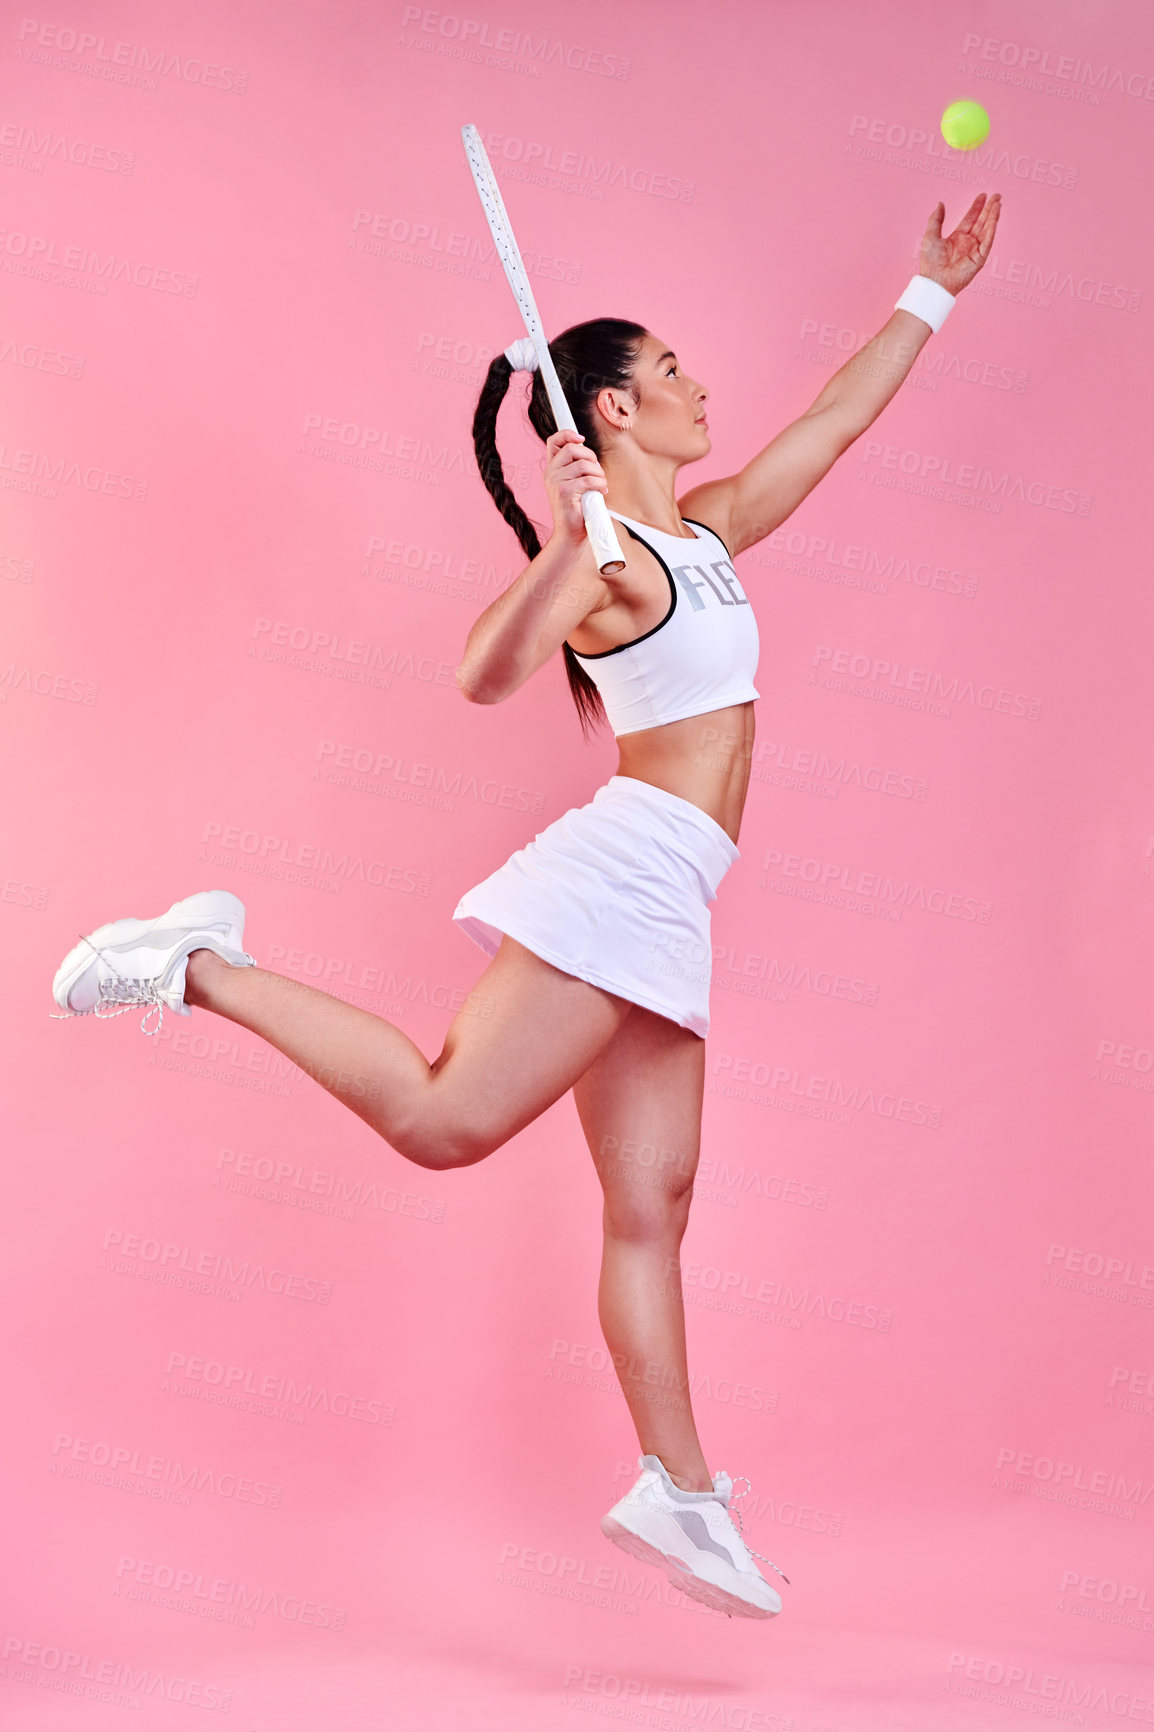 Buy stock photo Studio shot of a sporty young woman holding a tennis racket while throwing a tennis ball against a pink background